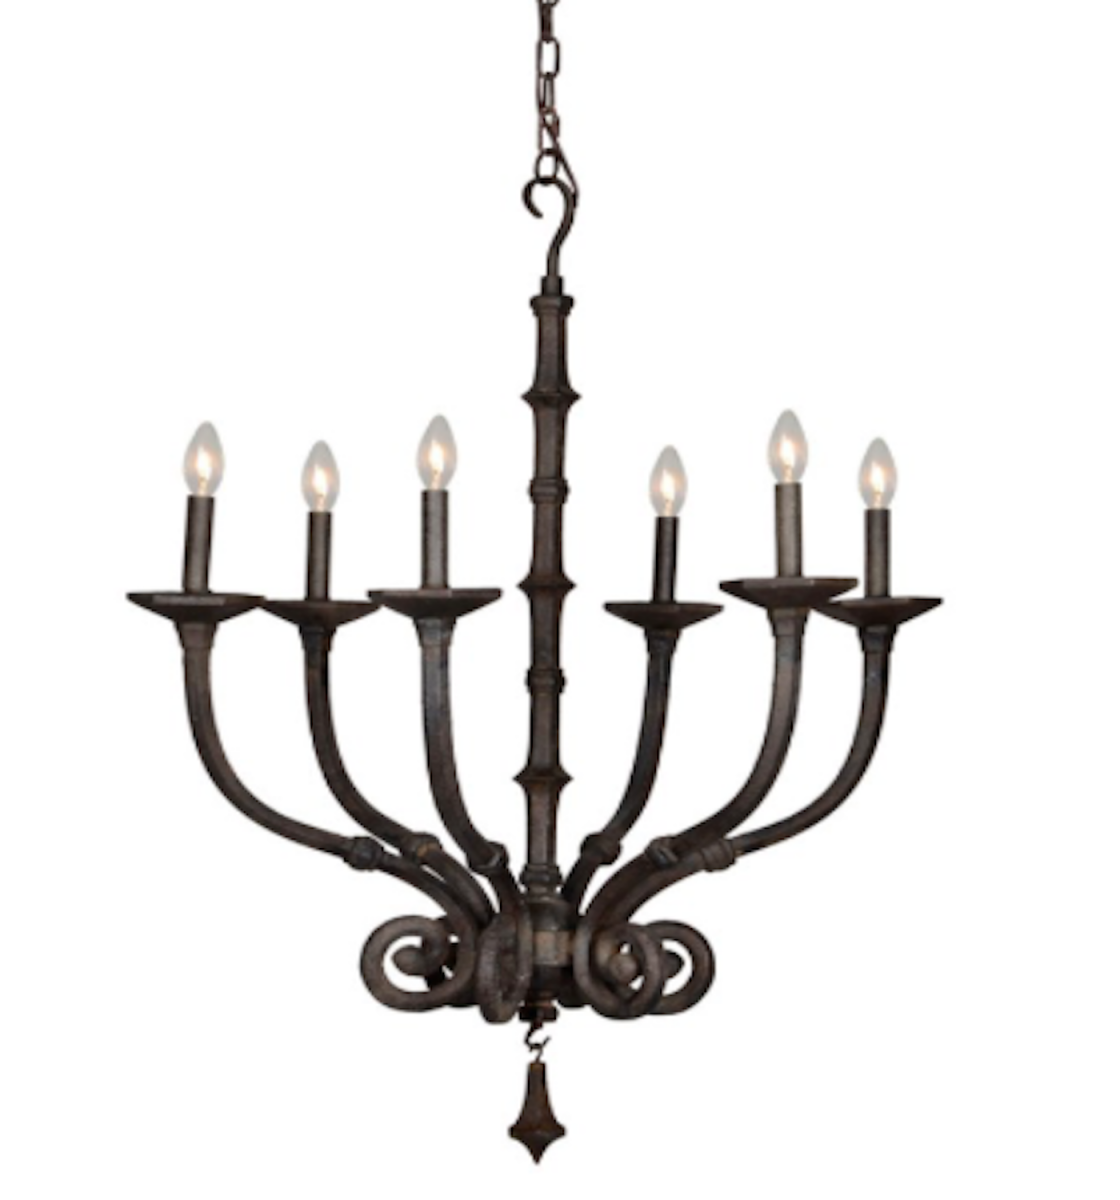 Black Wrought Iron 6 Arm Candle Chandelier BC USA Made Farmhouse Indoor Outdoor 